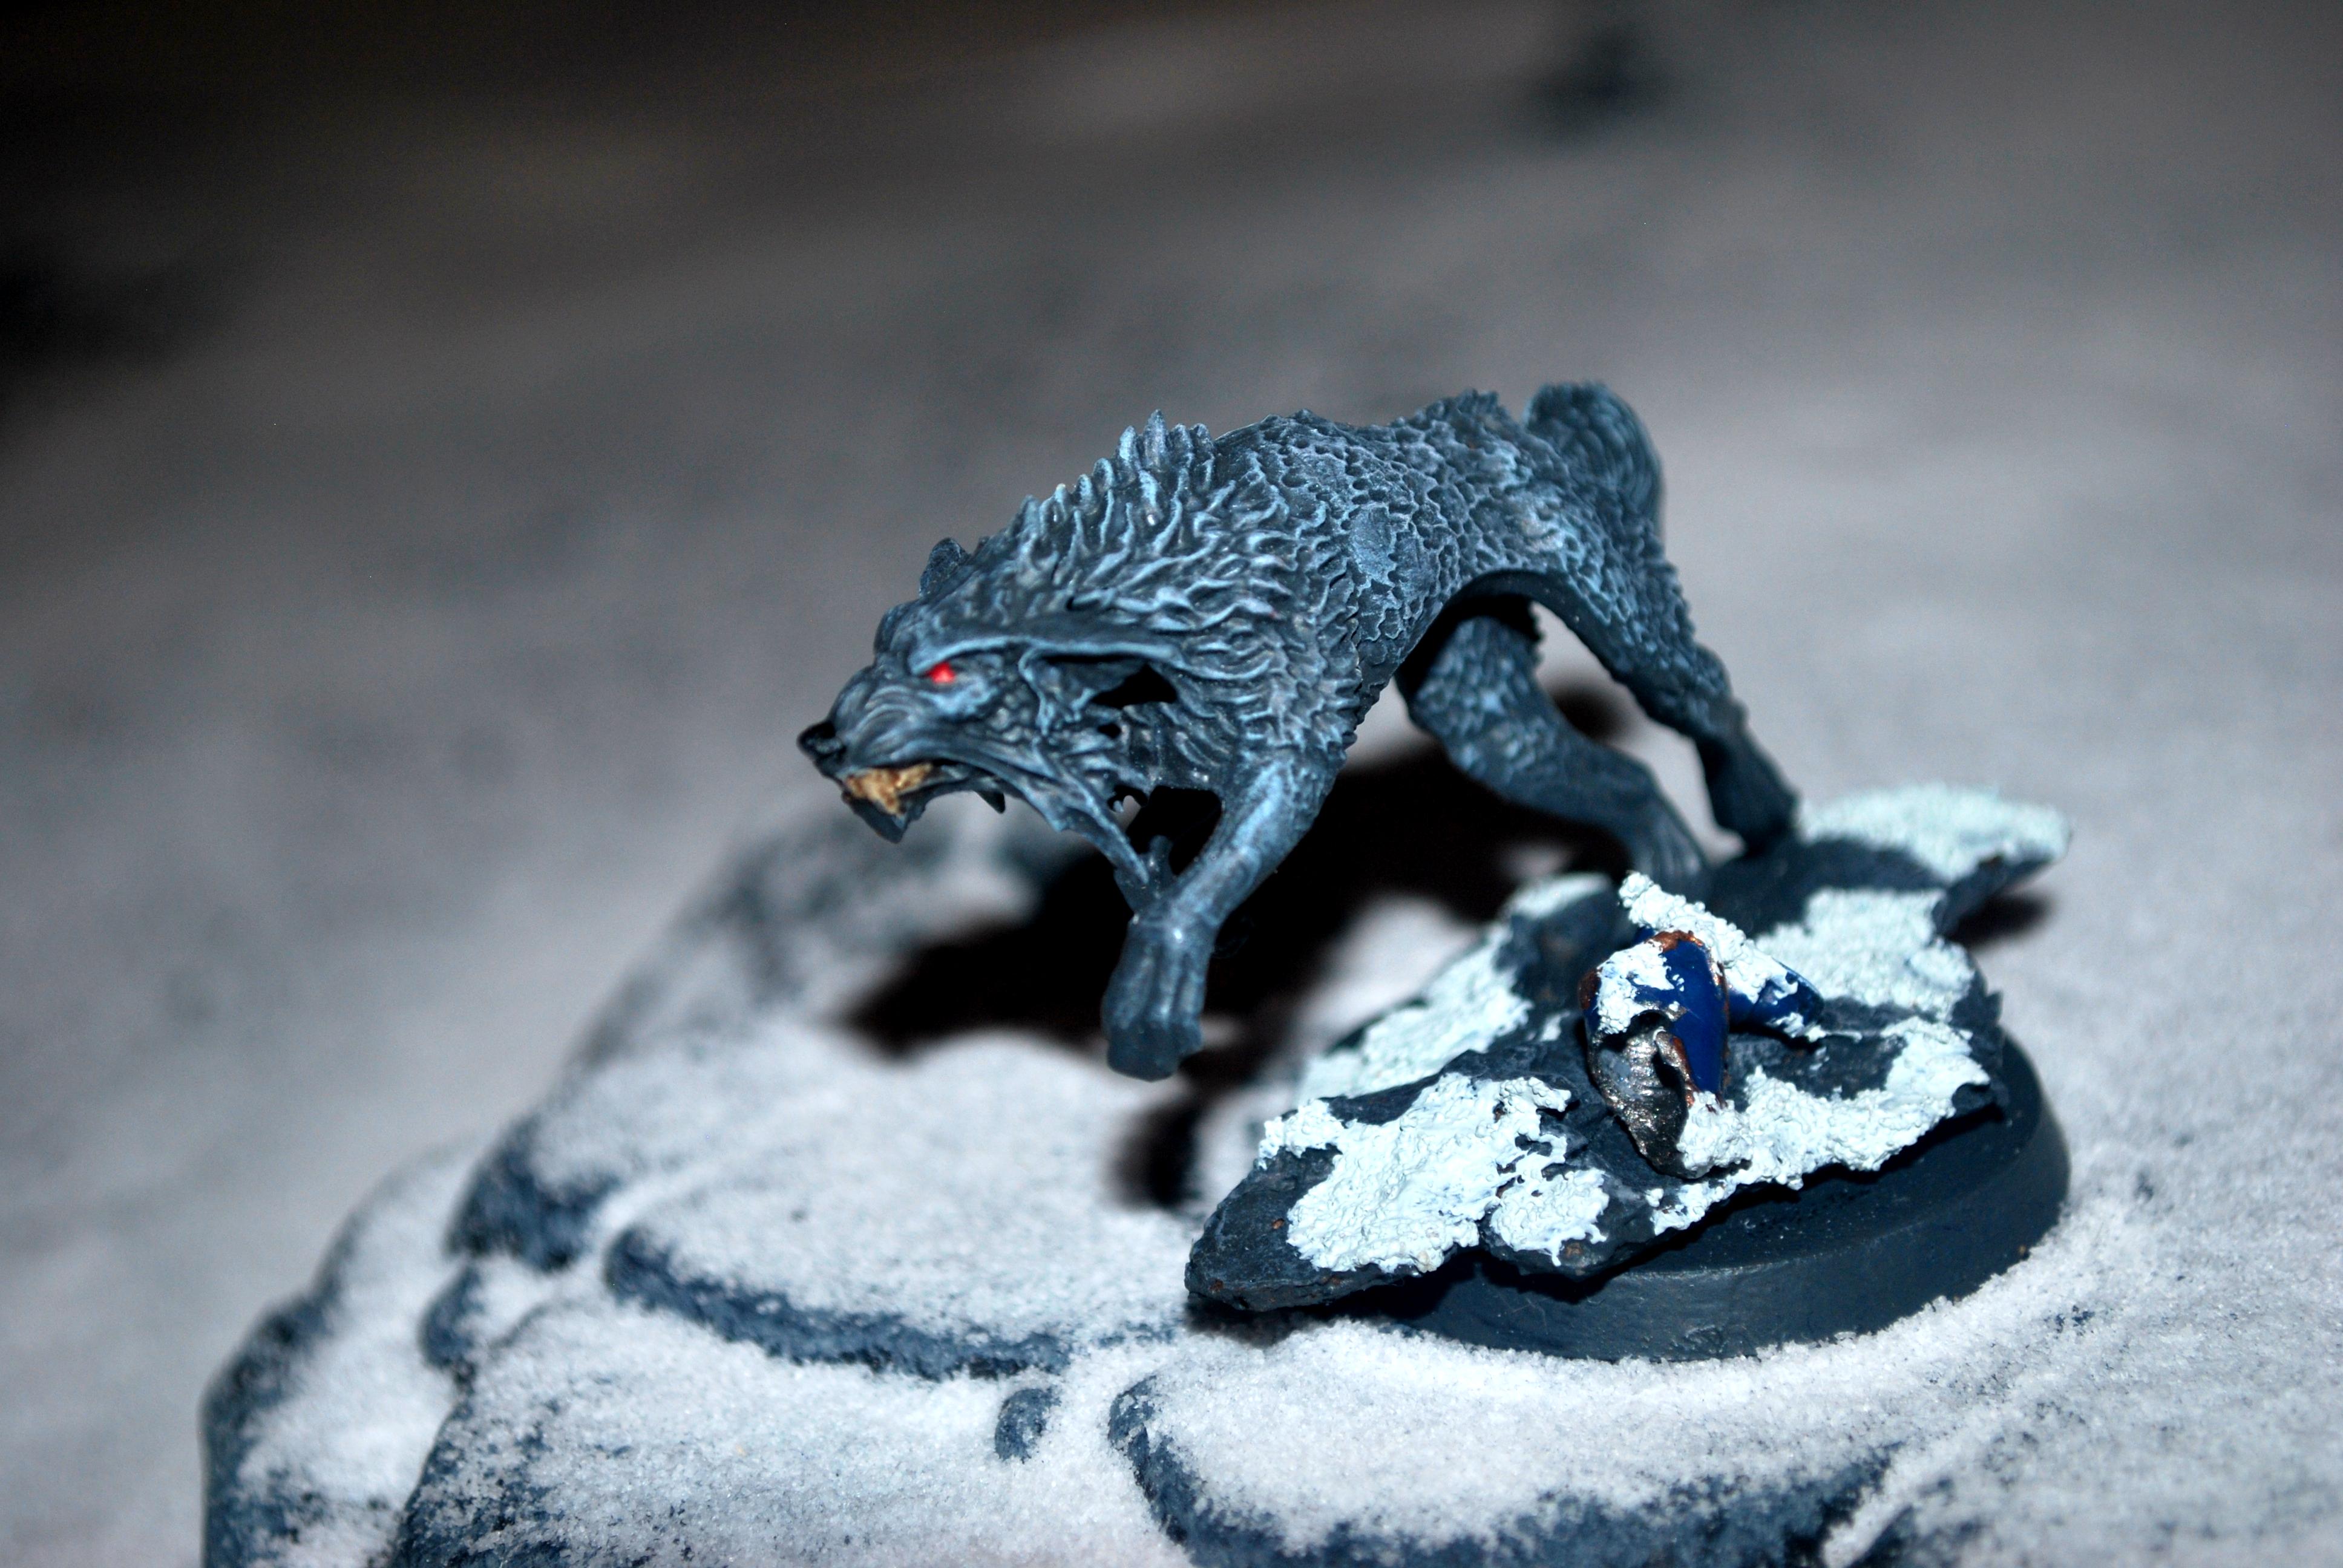 Fenris, Fenrisian, Fenrisian Wolves, Sons, Space, Space Marines, Space Wolves, Thousand, Winter, Wolf, Wolves